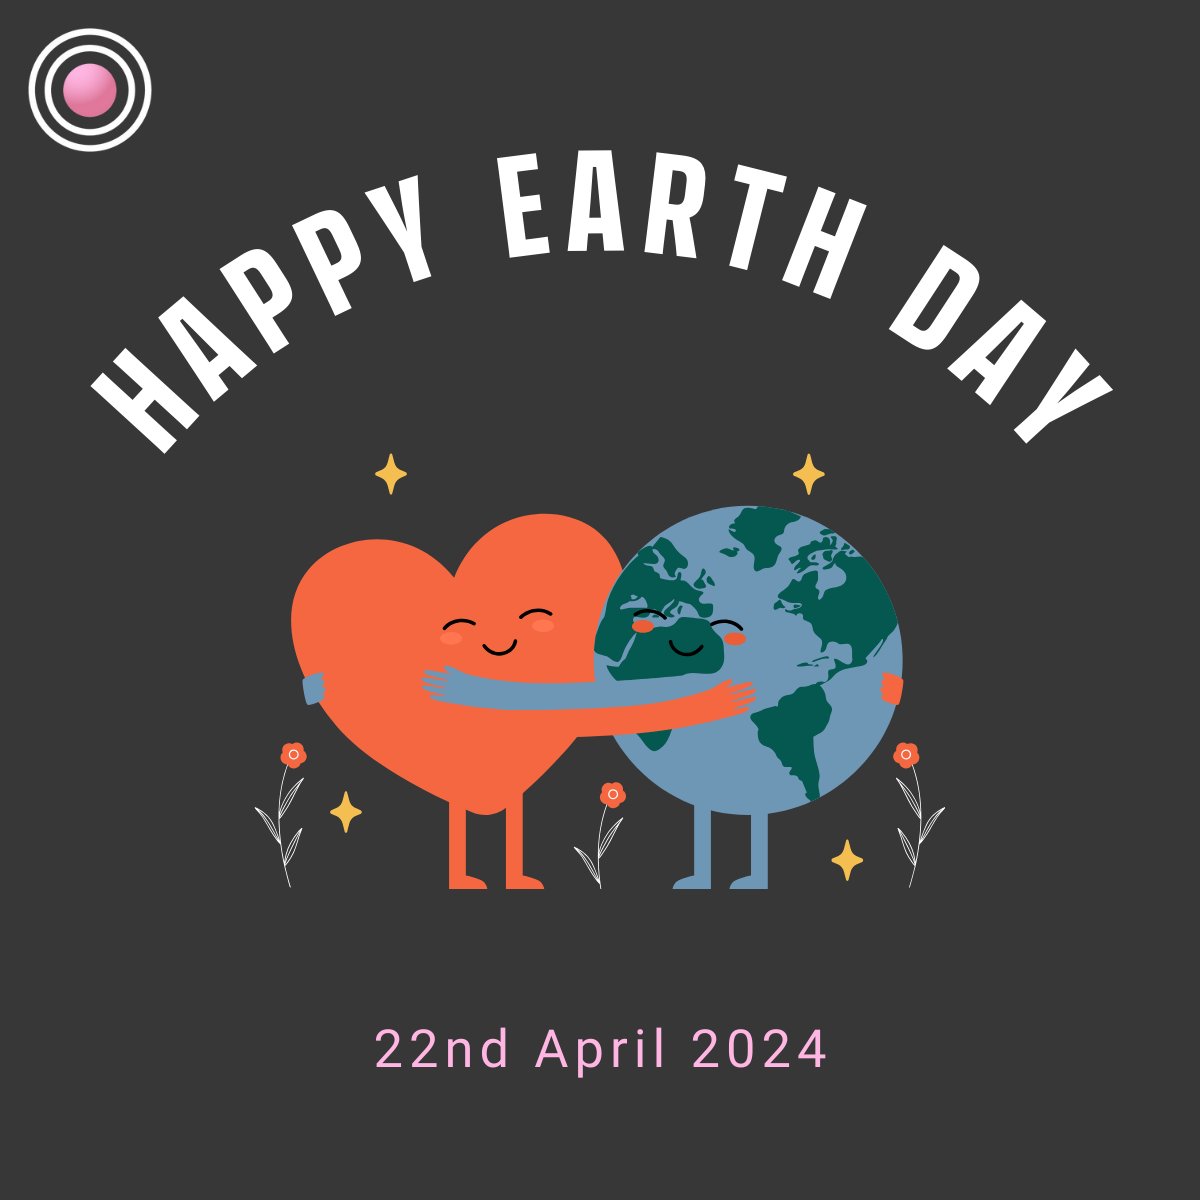 Happy Earth Day 🌍 This year's theme is 'Planet vs Plastics,' focusing on restoring ecosystems and awareness of plastics' risks. Check out the campaign, as they aim for a 60% reduction in plastic production by 2040. earthday.org/social-2024/ #EarthDay #Enviroment #Plastics